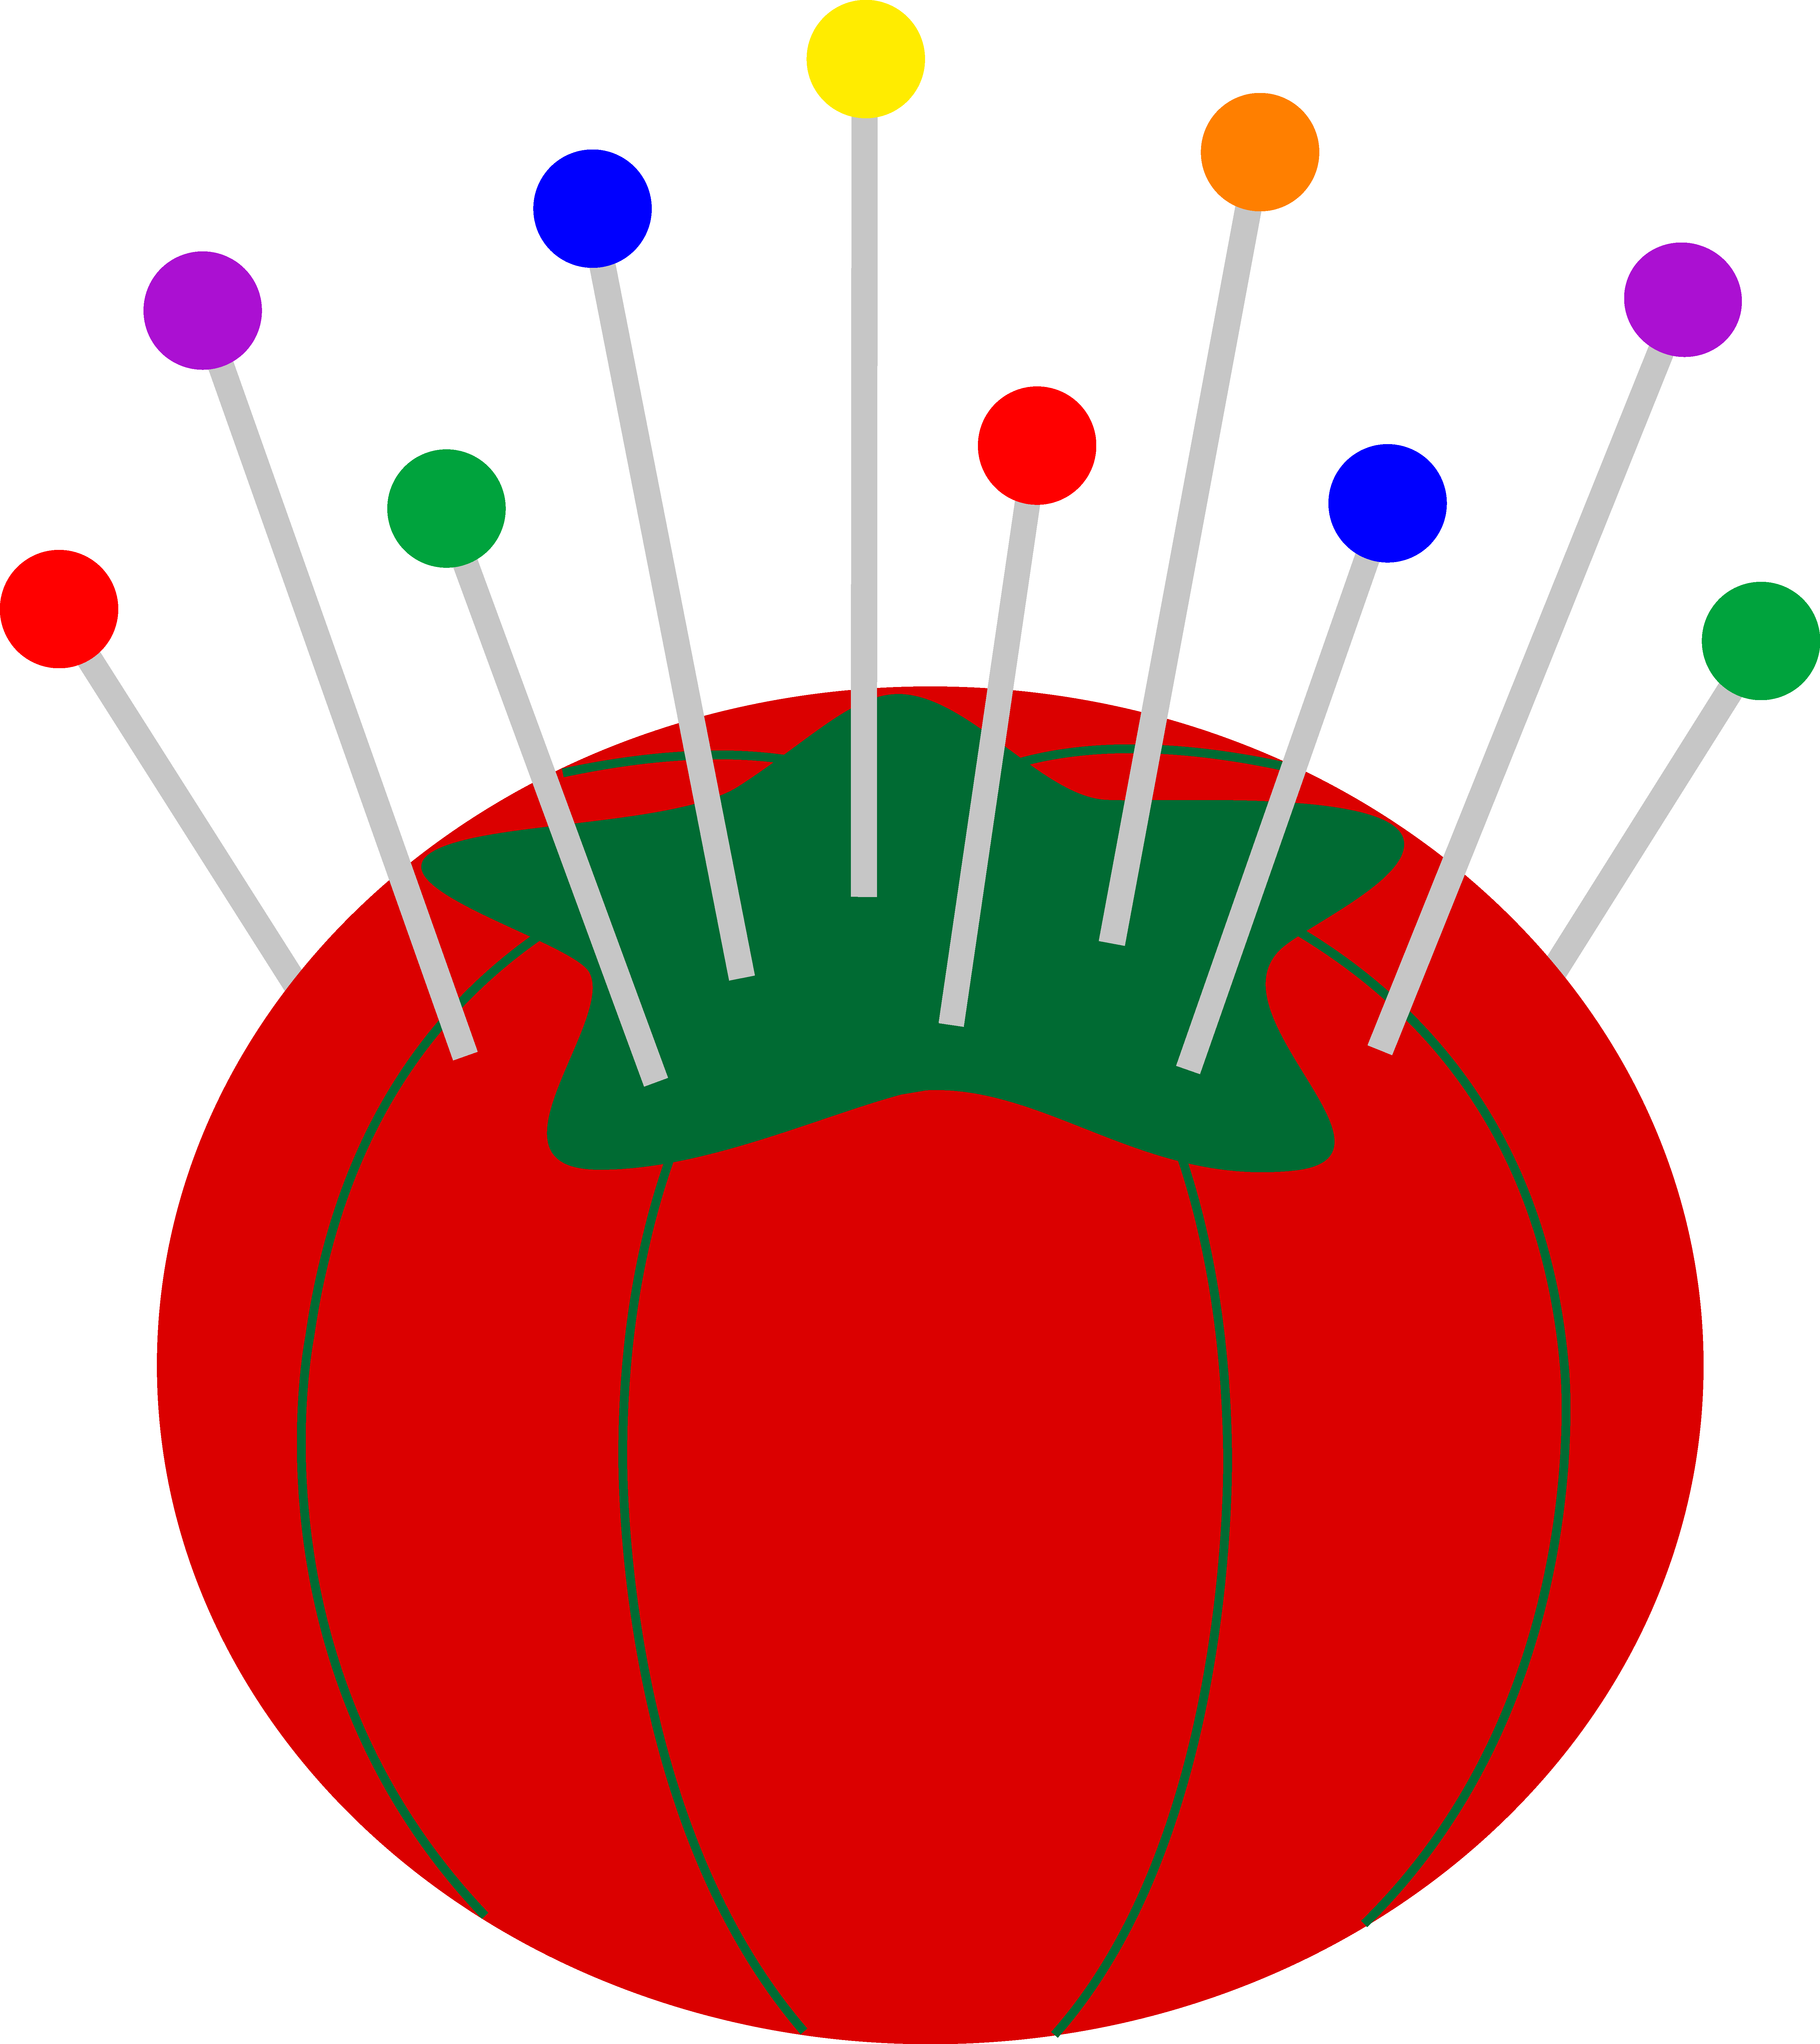 Tomato Pin Cushion With Pins - Free Clip Art